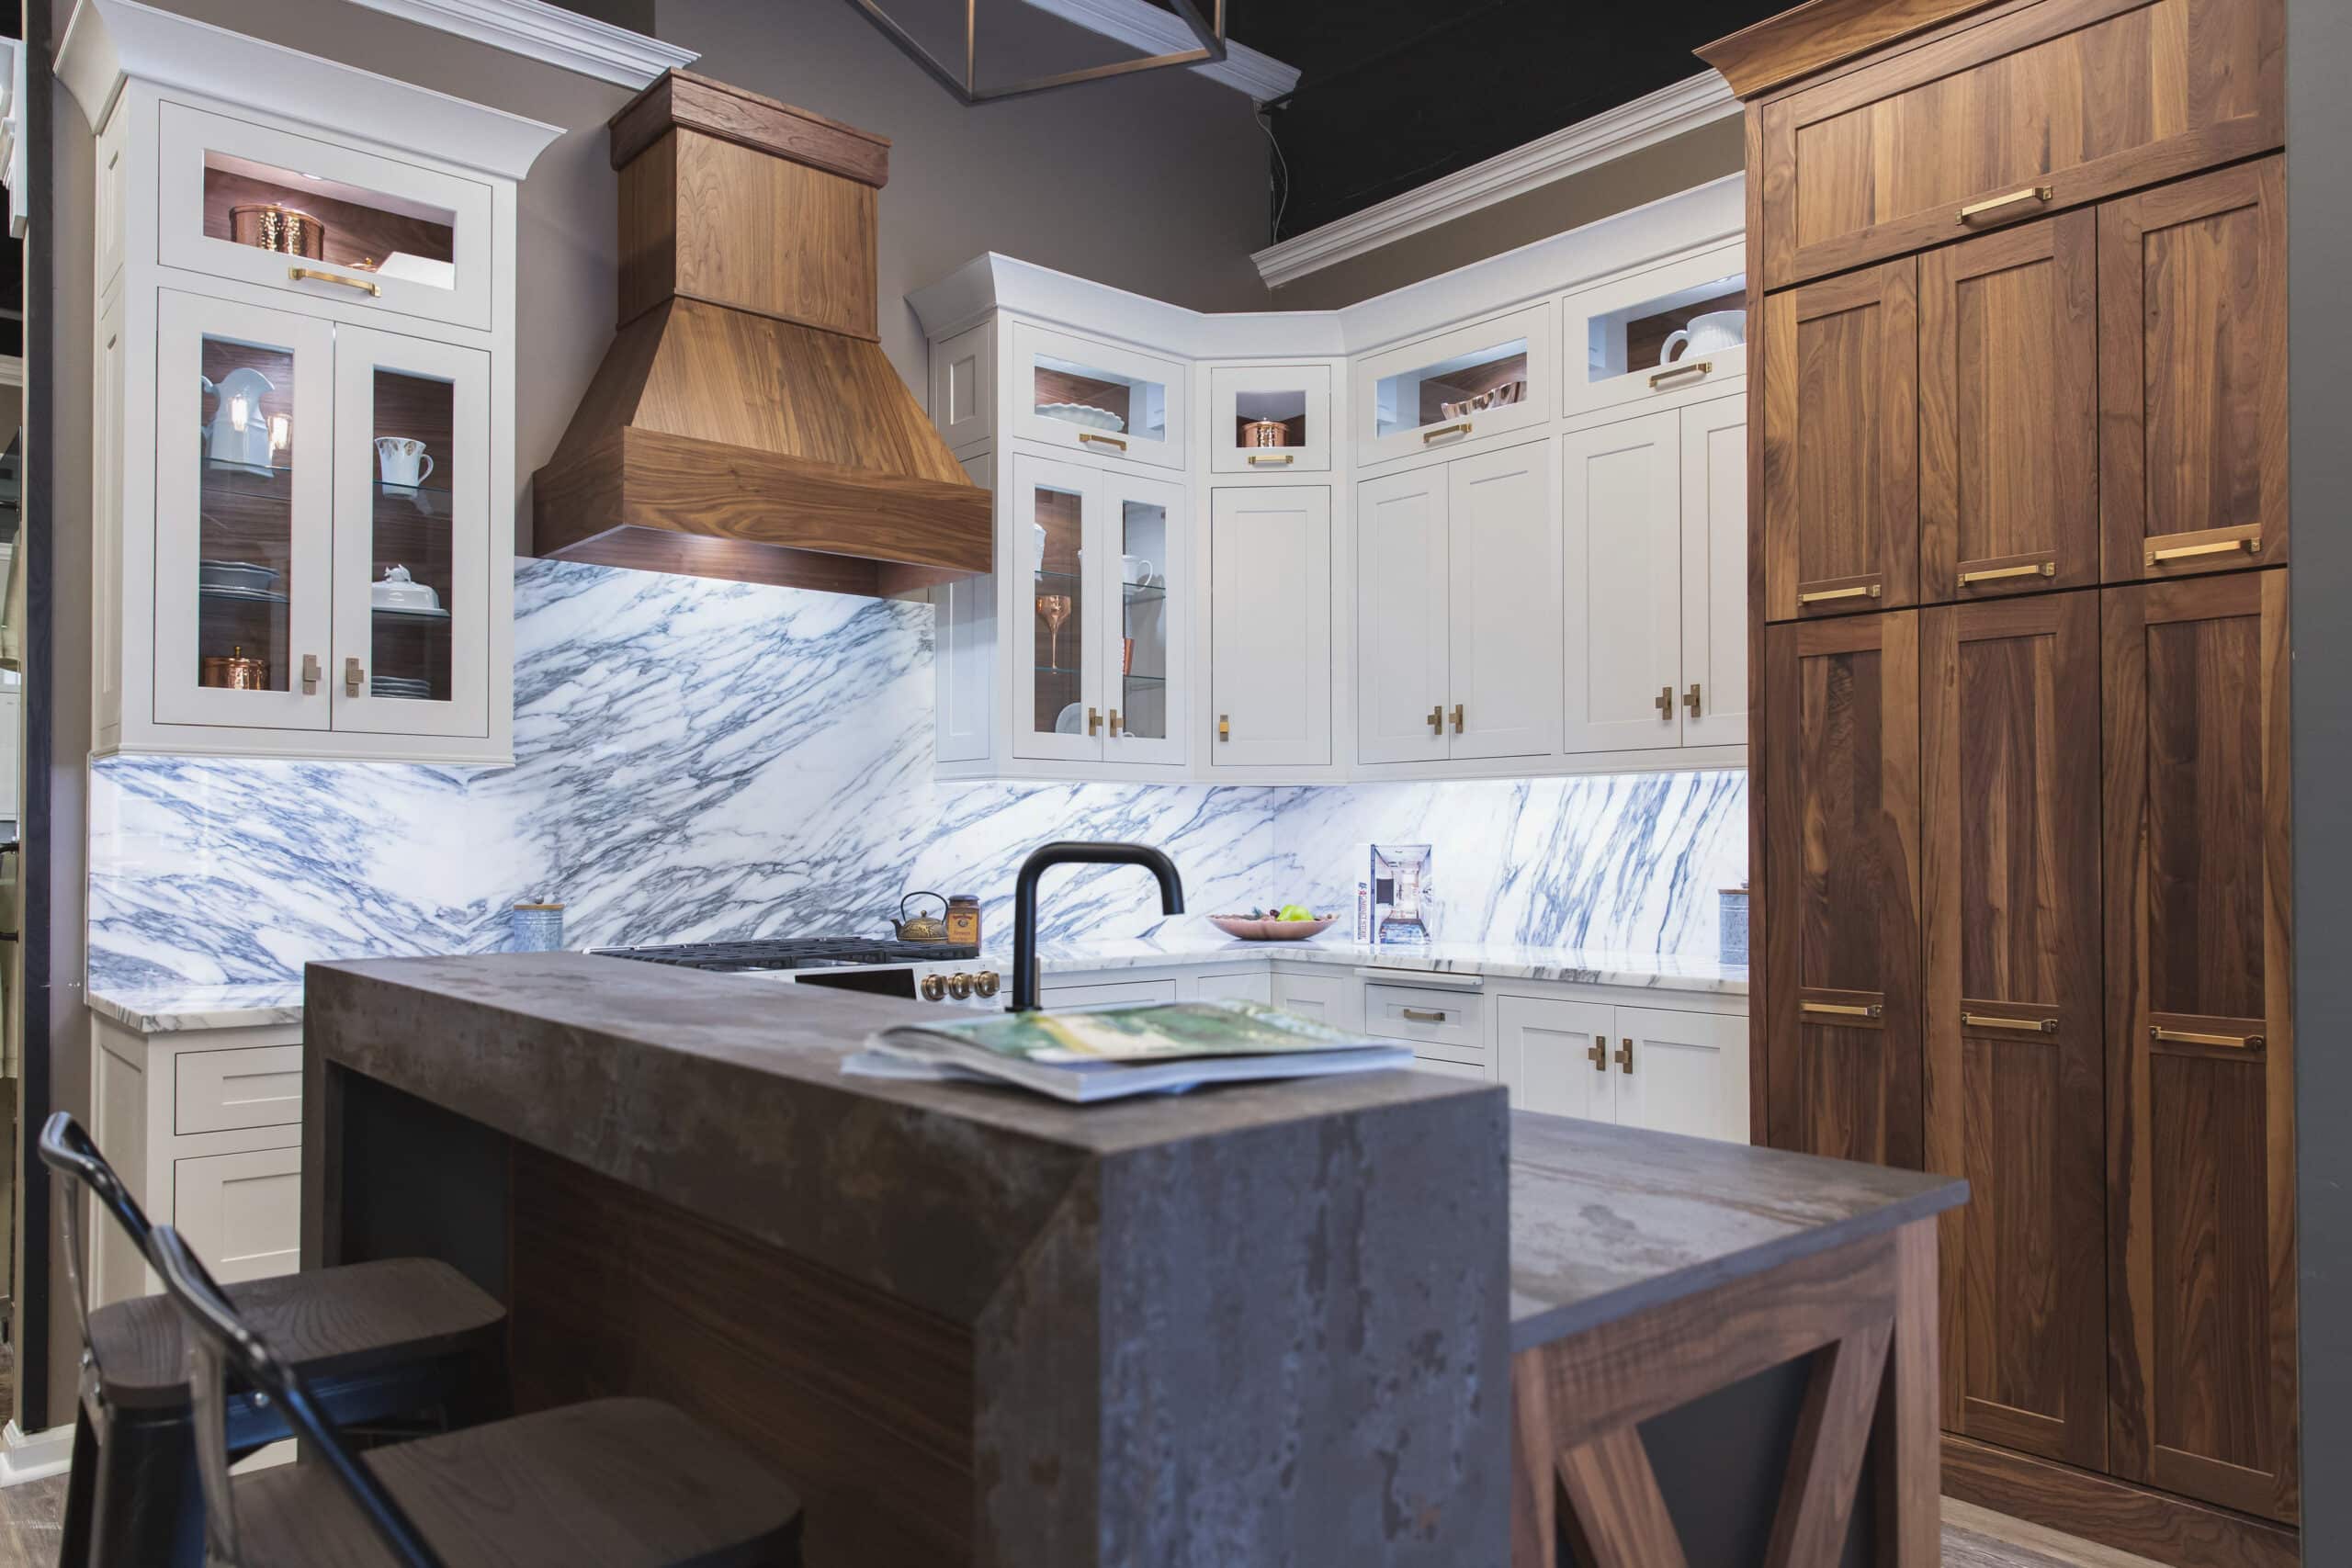 A kitchen with a sleek marble counter top and elegant wooden cabinets